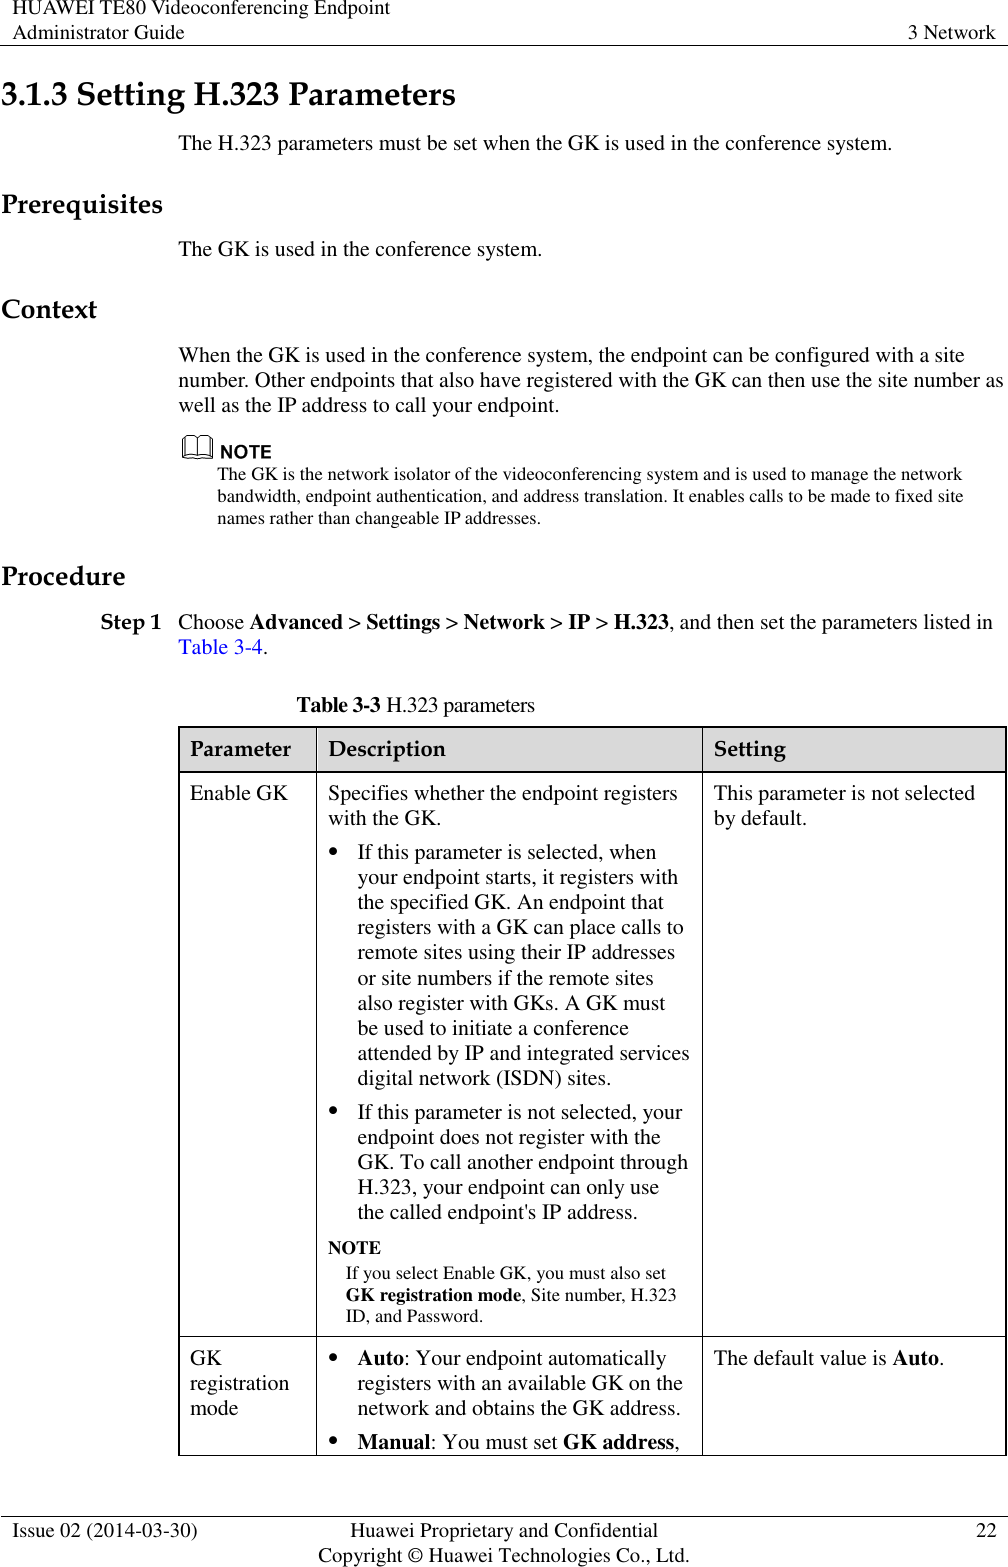 HUAWEI TE80 Videoconferencing Endpoint Administrator Guide 3 Network  Issue 02 (2014-03-30) Huawei Proprietary and Confidential Copyright © Huawei Technologies Co., Ltd. 22  3.1.3 Setting H.323 Parameters The H.323 parameters must be set when the GK is used in the conference system. Prerequisites The GK is used in the conference system. Context When the GK is used in the conference system, the endpoint can be configured with a site number. Other endpoints that also have registered with the GK can then use the site number as well as the IP address to call your endpoint.  The GK is the network isolator of the videoconferencing system and is used to manage the network bandwidth, endpoint authentication, and address translation. It enables calls to be made to fixed site names rather than changeable IP addresses. Procedure Step 1 Choose Advanced &gt; Settings &gt; Network &gt; IP &gt; H.323, and then set the parameters listed in Table 3-4. Table 3-3 H.323 parameters Parameter Description Setting Enable GK Specifies whether the endpoint registers with the GK.  If this parameter is selected, when your endpoint starts, it registers with the specified GK. An endpoint that registers with a GK can place calls to remote sites using their IP addresses or site numbers if the remote sites also register with GKs. A GK must be used to initiate a conference attended by IP and integrated services digital network (ISDN) sites.  If this parameter is not selected, your endpoint does not register with the GK. To call another endpoint through H.323, your endpoint can only use the called endpoint&apos;s IP address. NOTE If you select Enable GK, you must also set GK registration mode, Site number, H.323 ID, and Password.   This parameter is not selected by default. GK registration mode  Auto: Your endpoint automatically registers with an available GK on the network and obtains the GK address.  Manual: You must set GK address, The default value is Auto. 